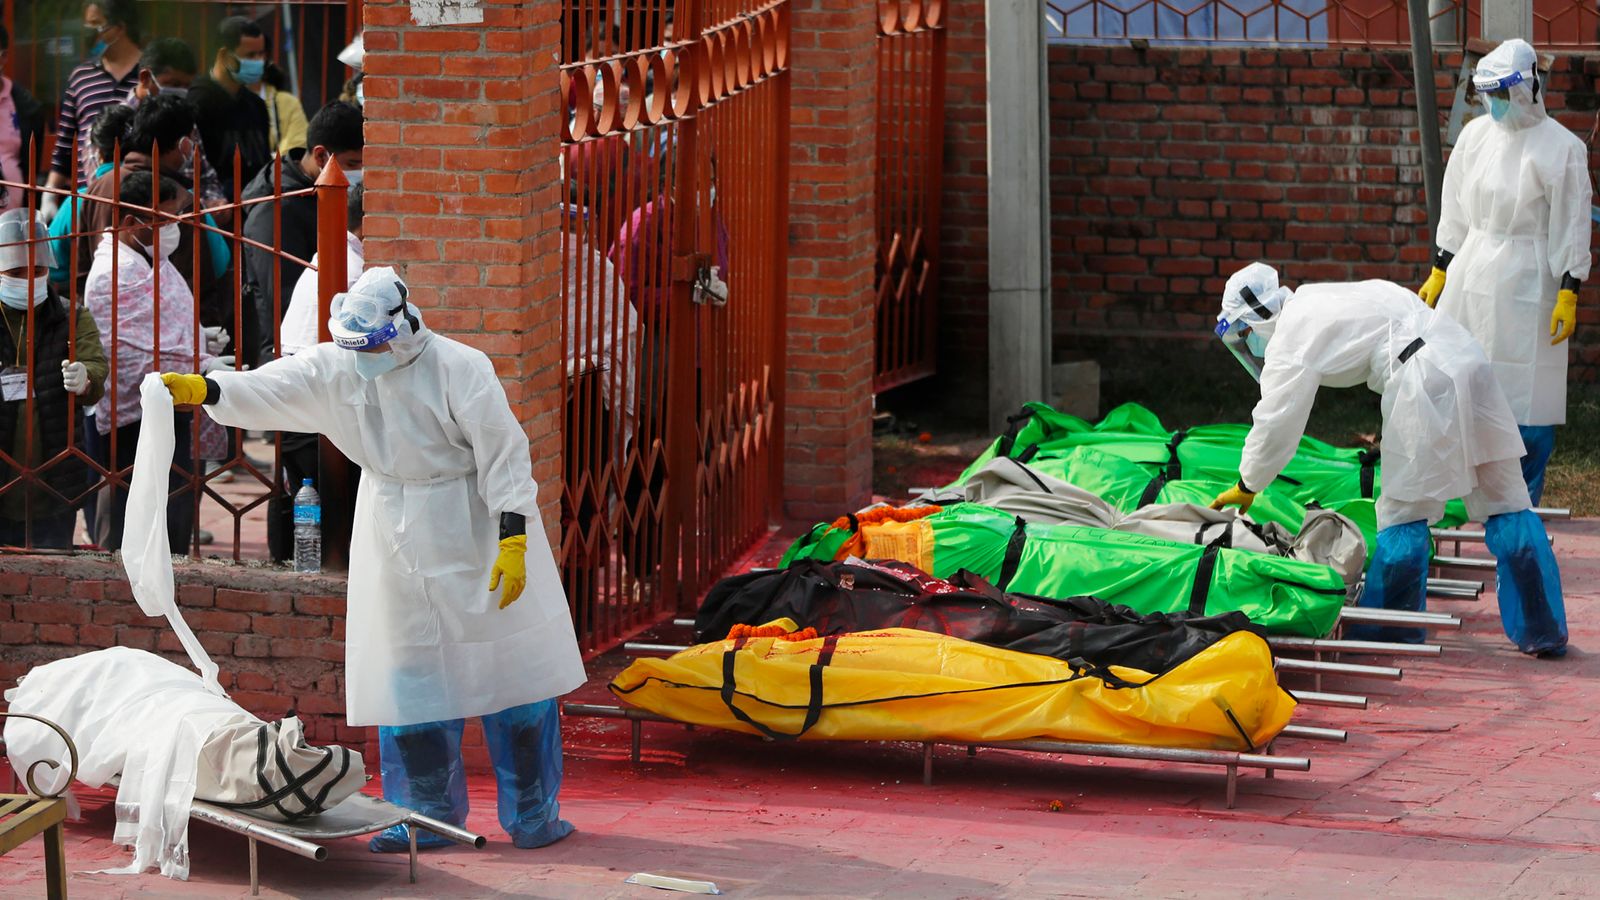 COVID-19: World Health Organisation should have declared global emergency earlier to prevent outbreak of pandemic – report finds